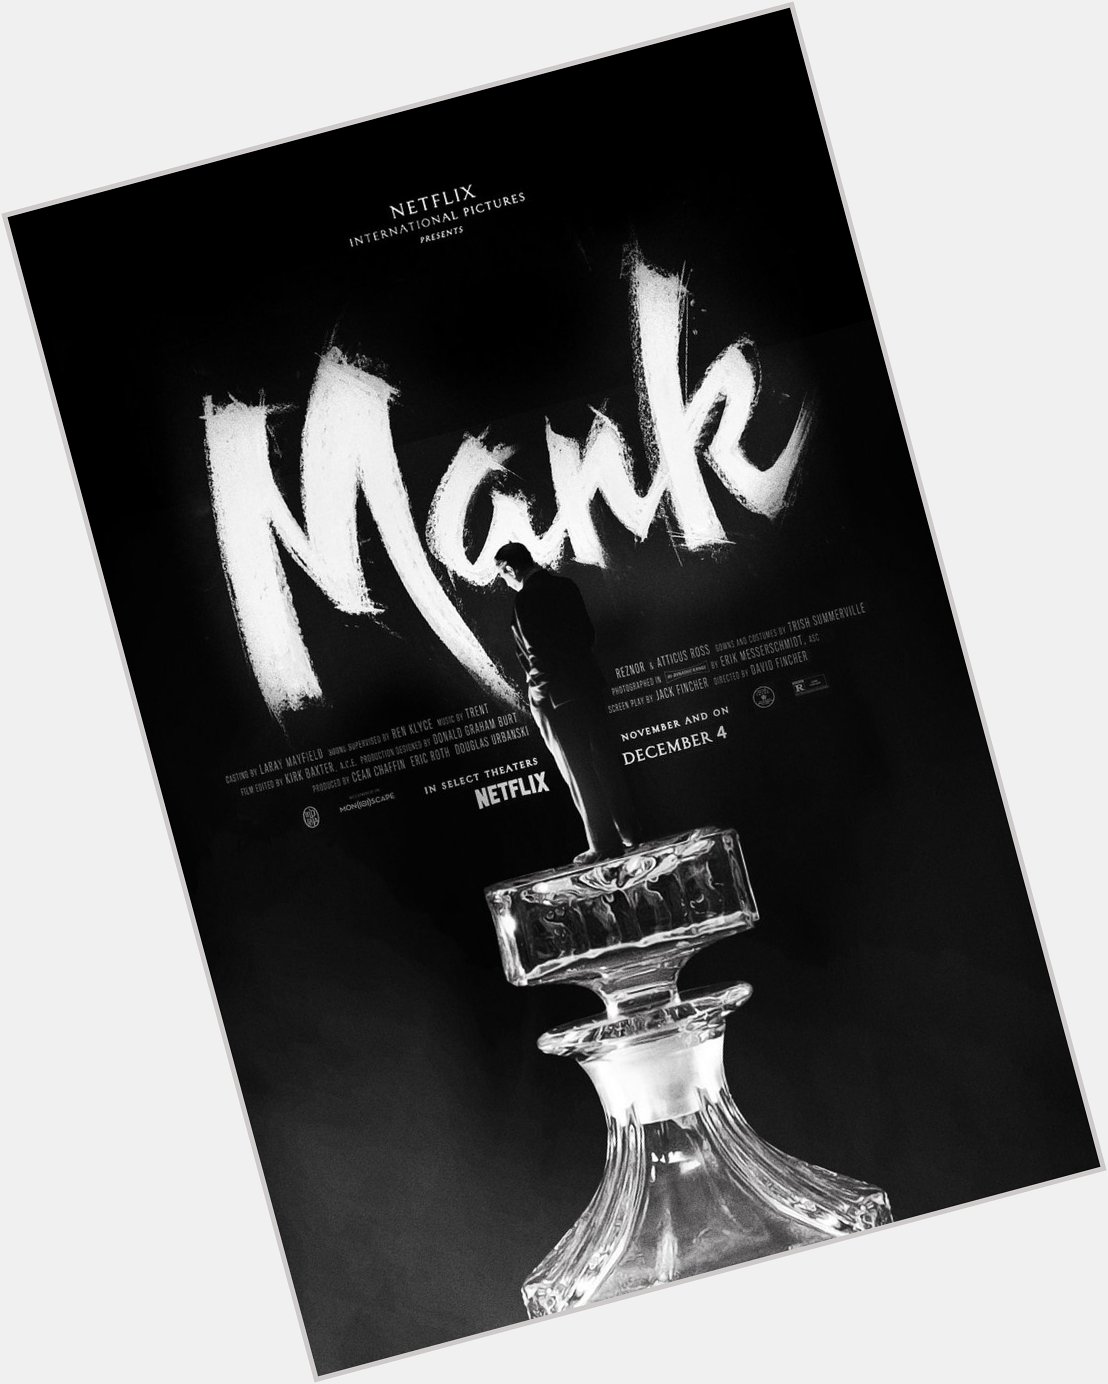 Happy birthday David Fincher! 
Here s my poster for Mank from earlier this year 